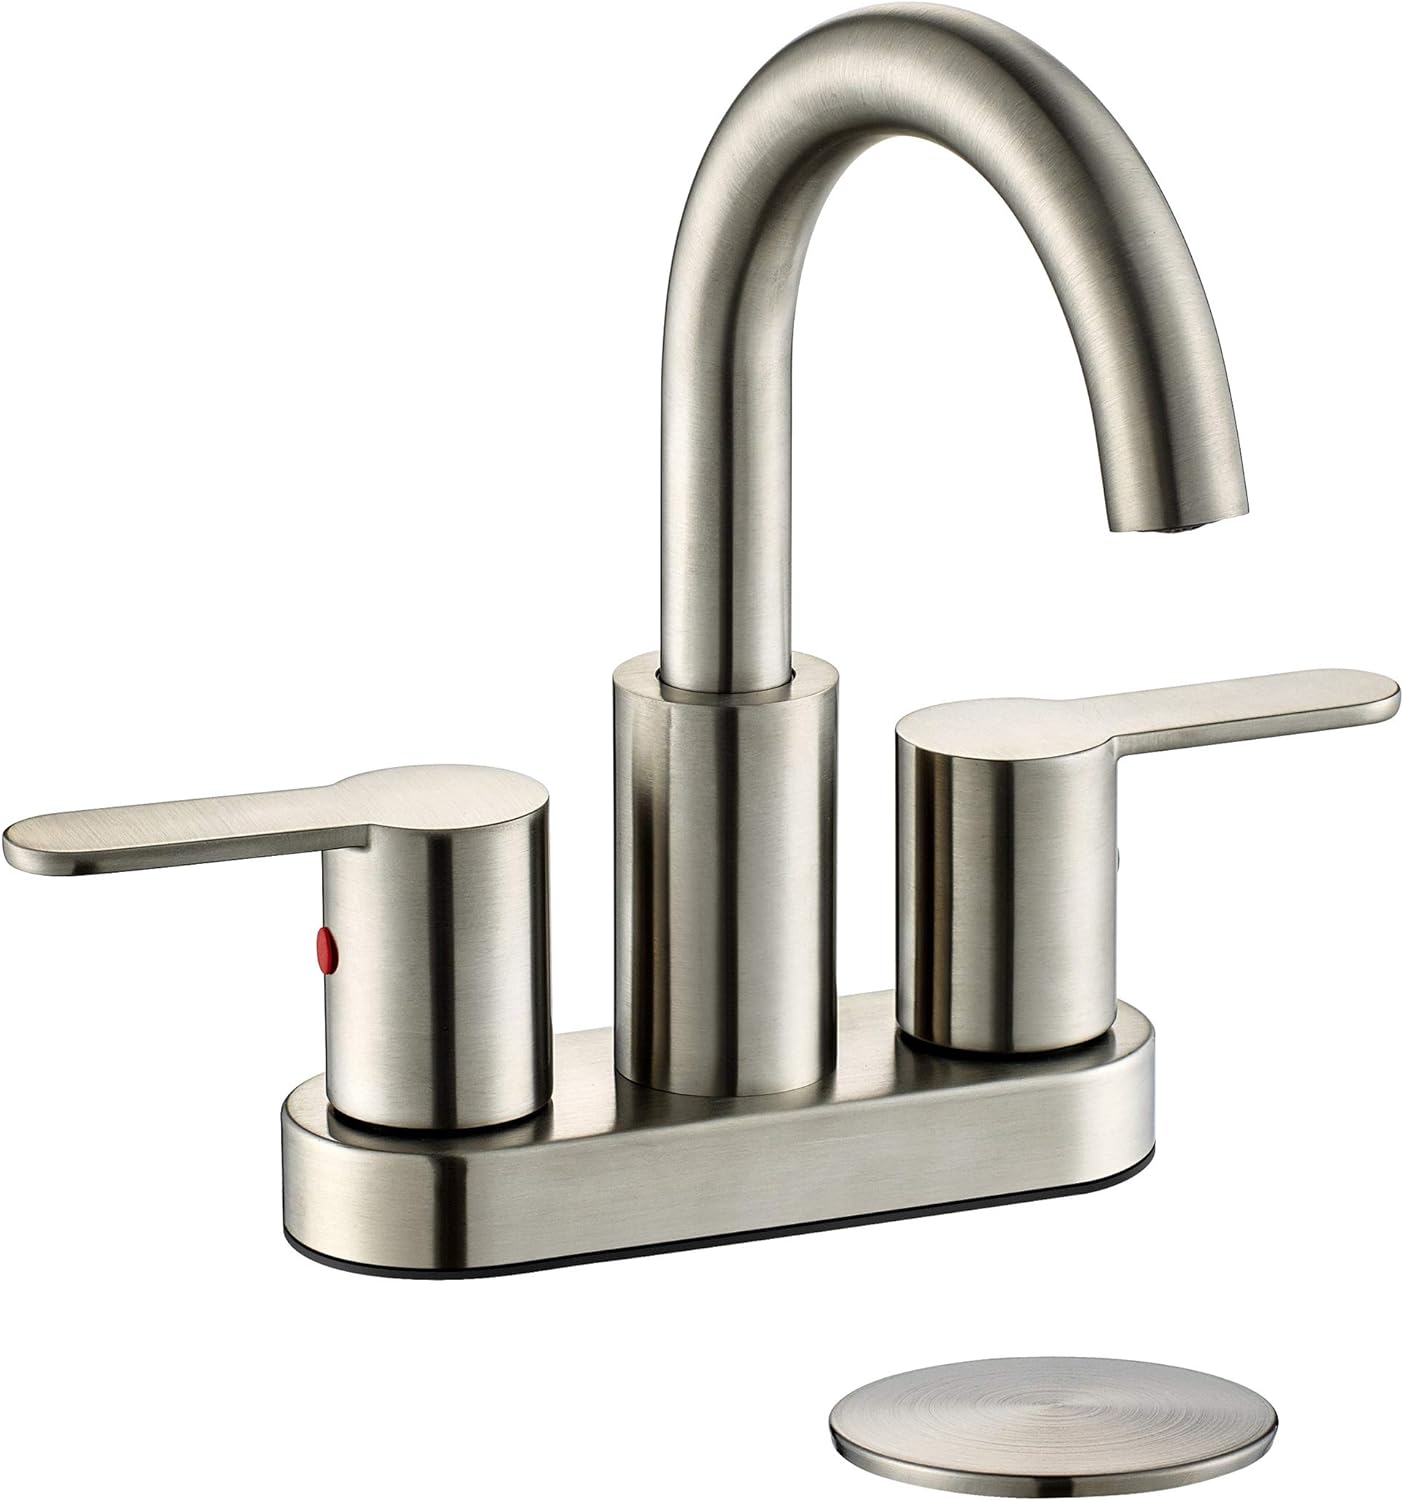 The product is high quality, easy to install, and very nice looking - even on an older solid surface countertop. The handles and faucet are high quality and appear to be durable. The downside I've found is that water spots show very easily, but overall - this is a minor inconvenience. The fixture is one I would definitely reccomend!